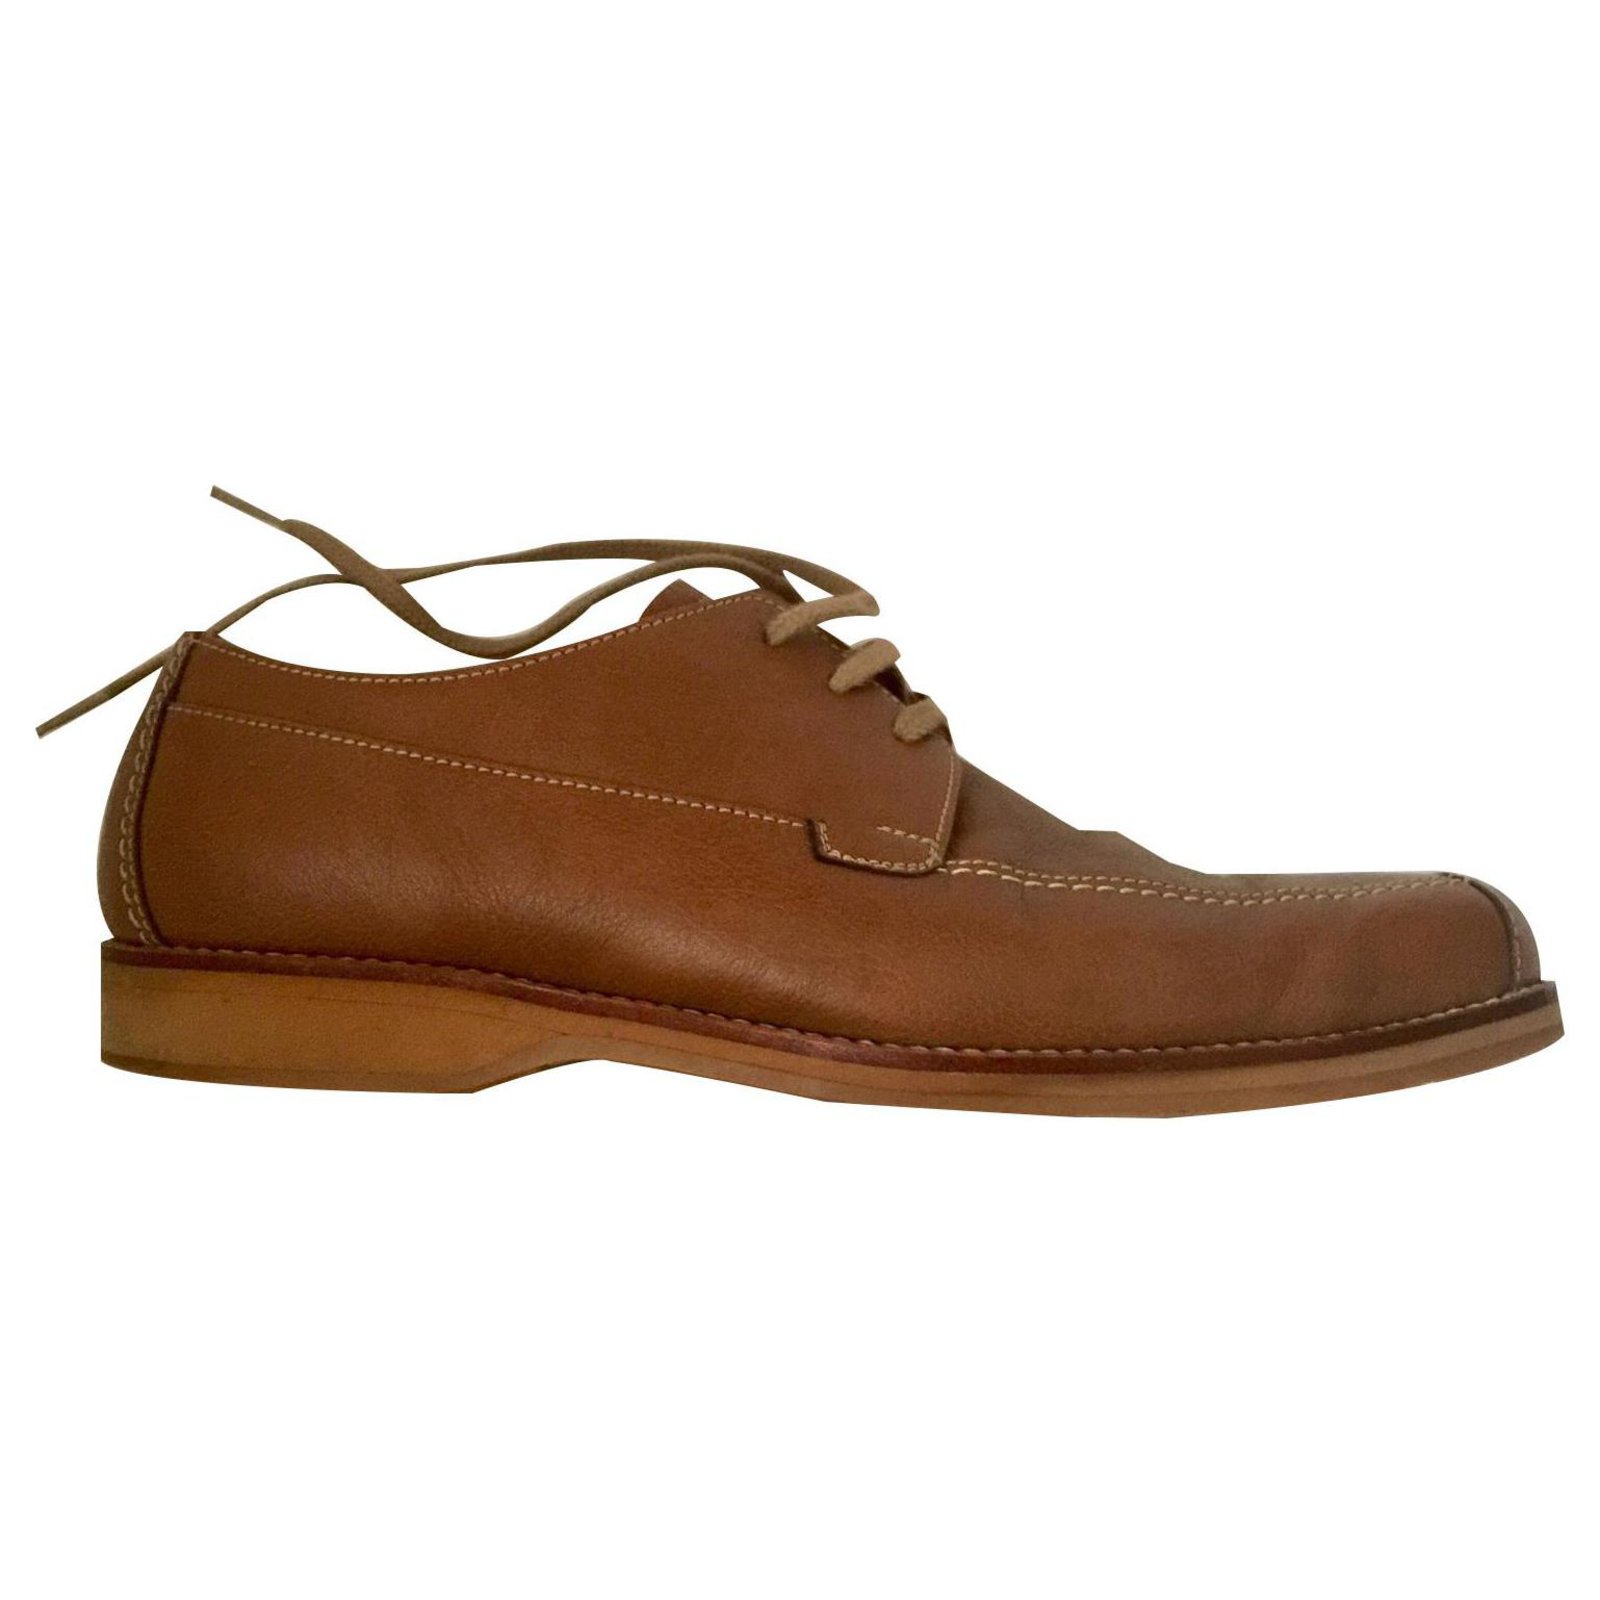 Burberry lace up shoes Brown Leather  - Joli Closet